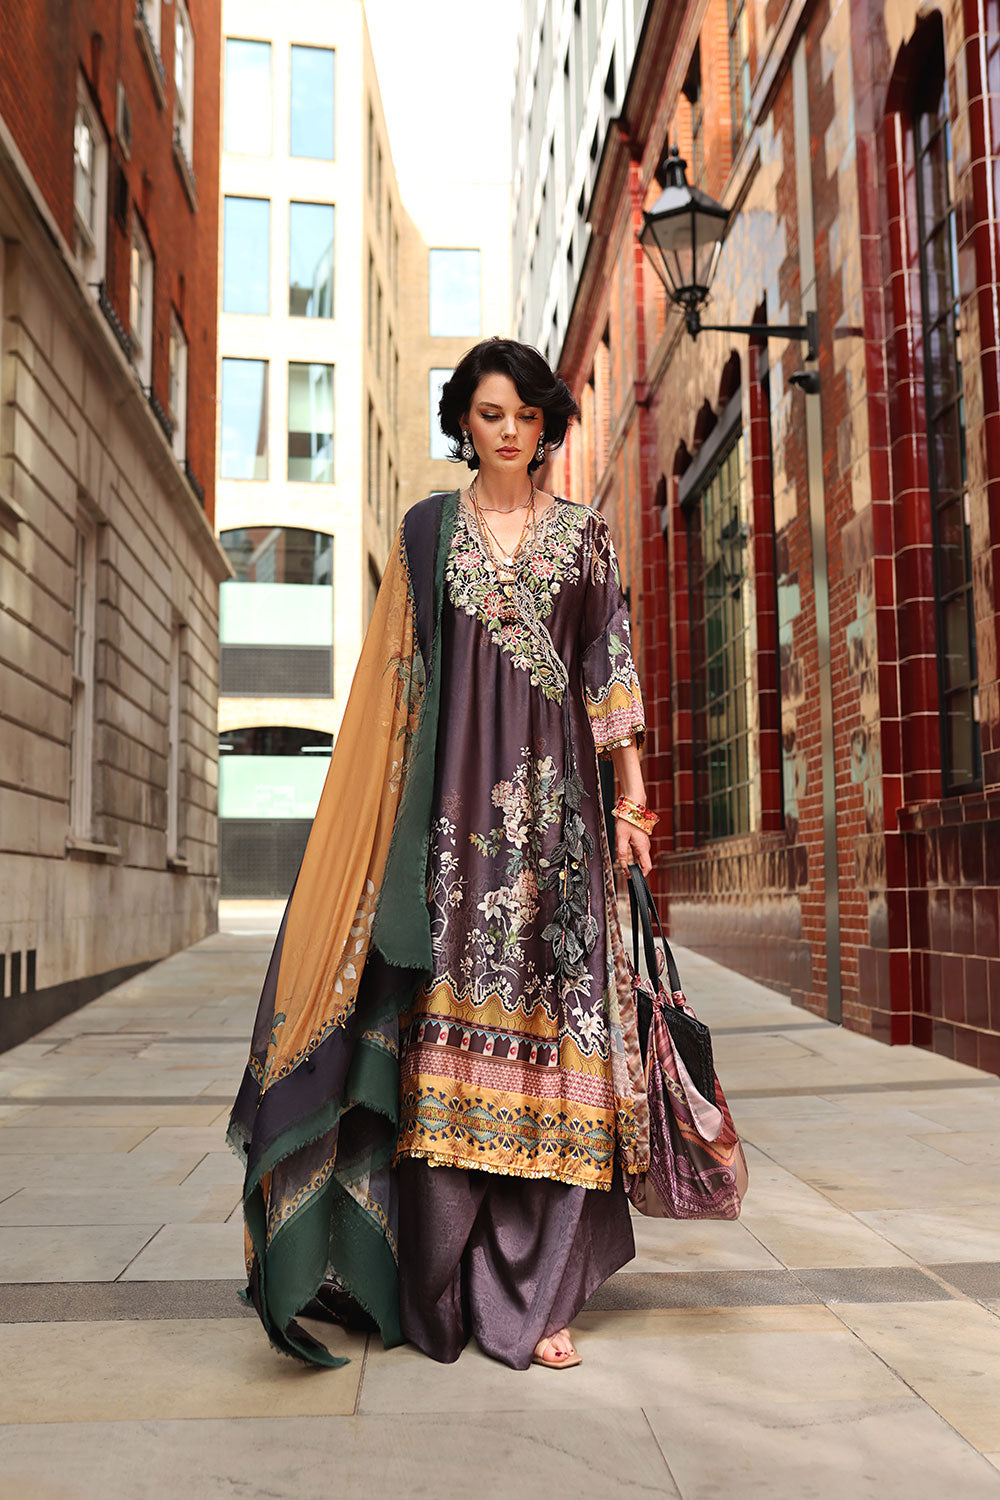 Buy Now, D#1 - Silk Collection - Sobia Nazir - Fall 2023 - Shahana Collection - Wedding and Bridal Party Dresses - Shahana UK - Pakistani Designer Wear in UK